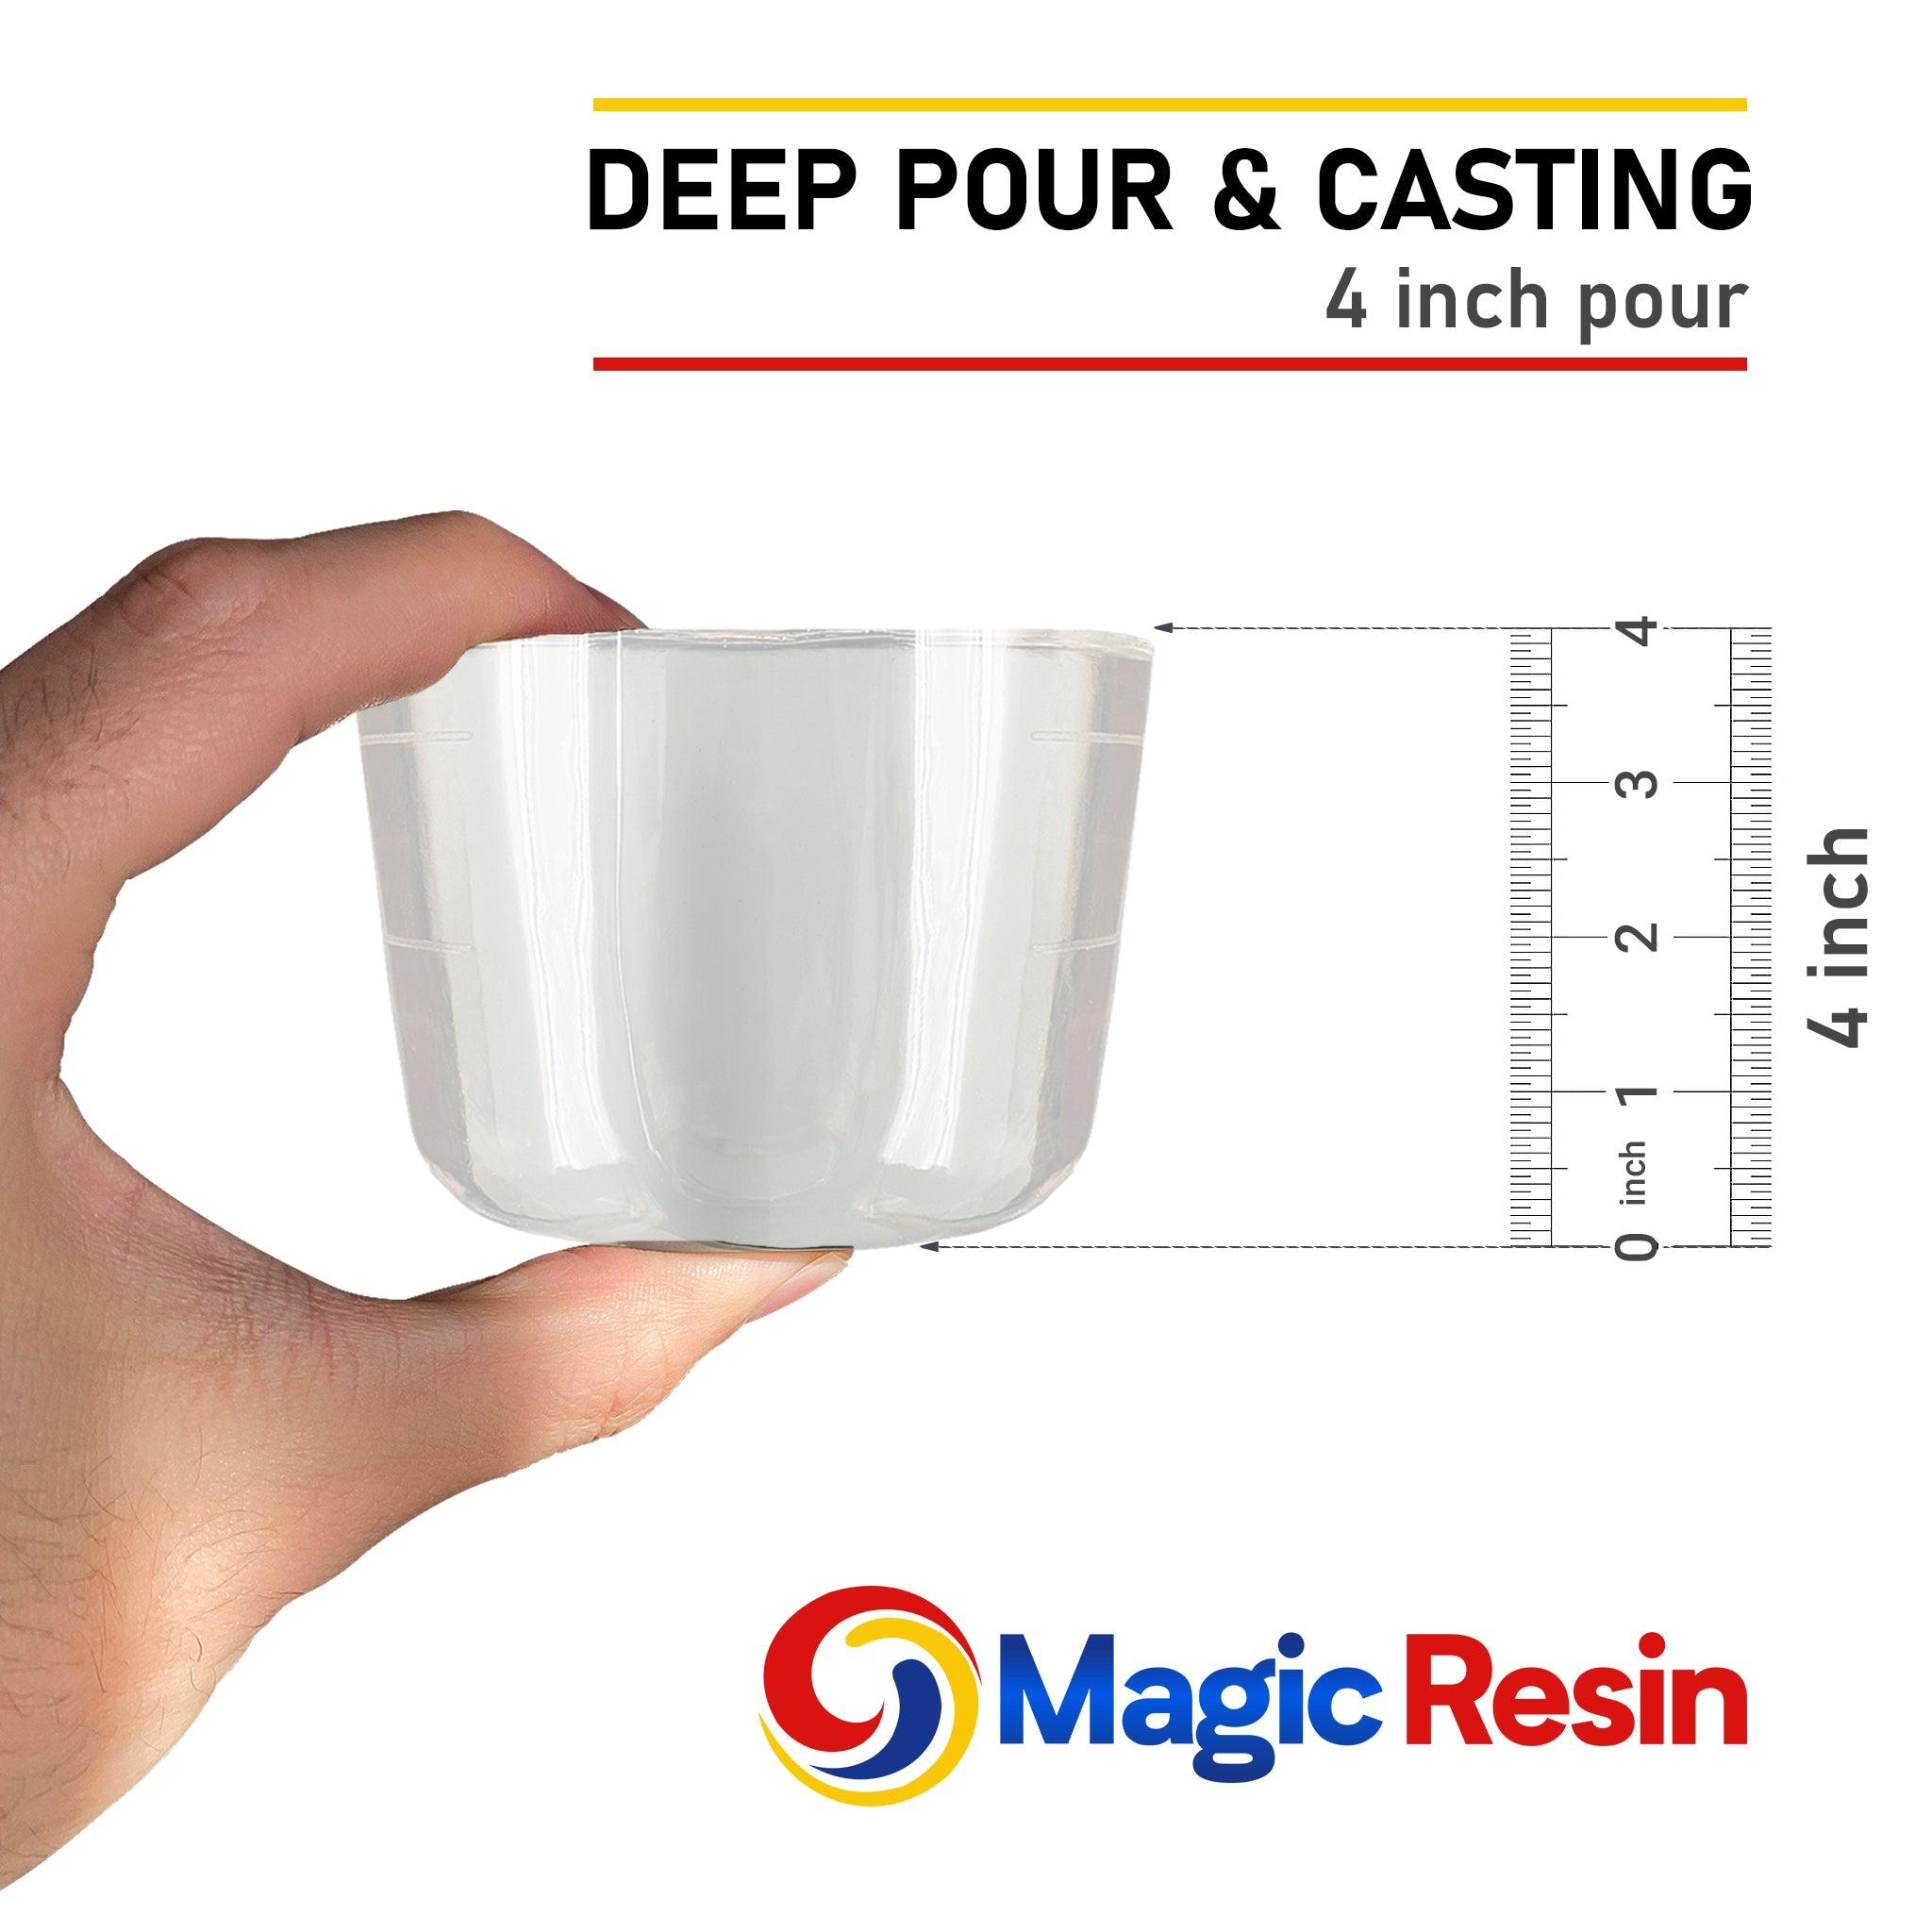 6-Gallon 4 Deep Pour Epoxy Resin Kit for River Tables, Craft, Casting –  Magic Resin USA